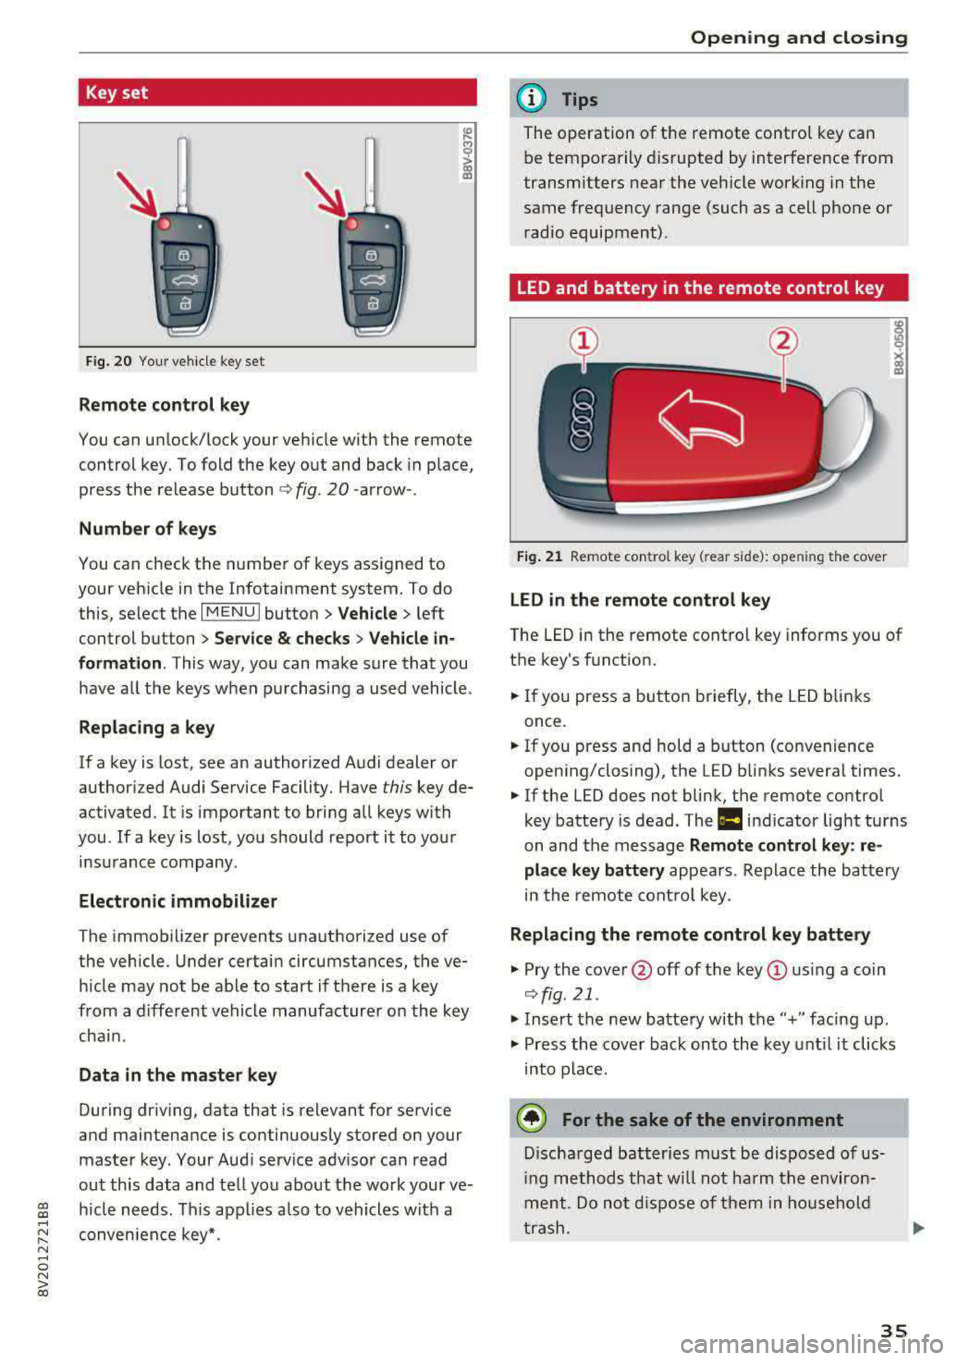 AUDI A3 SEDAN 2017 Owners Guide a,  a, ..... N 
" N ..... 0 N > 00 
Key set 
Fig. 2 0 Your vehi cle  key se t 
Remote  control  key 
You can un lock/lock  your  veh icle with  the  remote 
control  key. To fold  the  key out  and ba